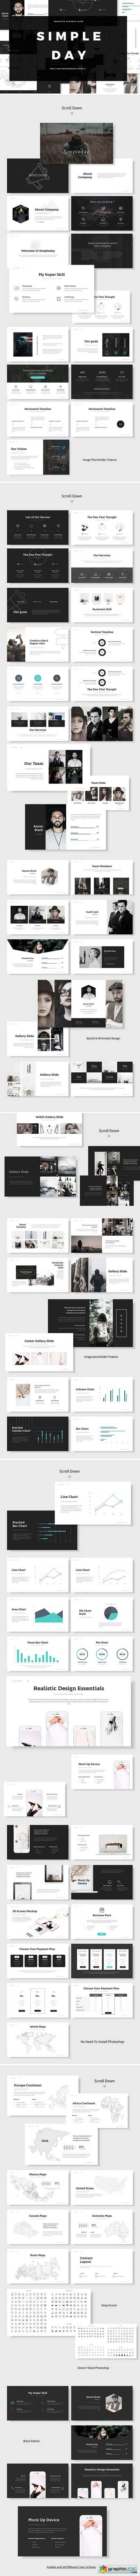 Simpleday Powerpoint Template